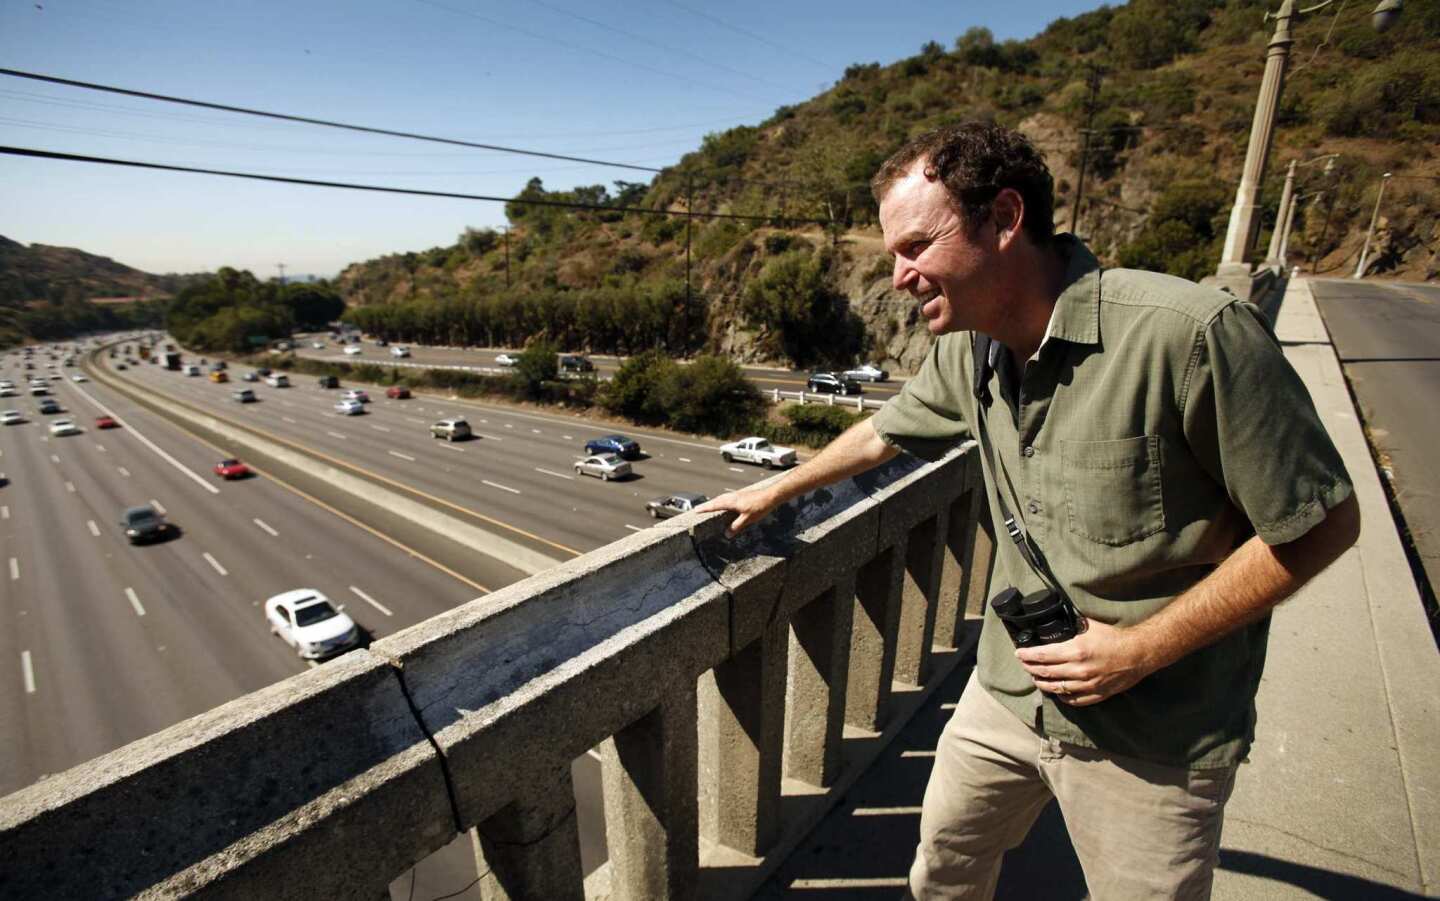 Daniel S. Cooper, president of Cooper Ecological Monitoring, crosses the Mulholland Drive Bridge over the 101 Freeway through the Cahuenga Pass. Cooper believes the bridge may have been the route taken by mountain lion P-22, who managed to cross both the 405 and 101 freeways to reach Griffith Park. Cooper Ecological Monitoring places remote cameras on potential wildlife corridors for the Griffith Park Wildlife Connectivity Study to evaluate the movement of mammals through the corridors that may connect Griffith Park to neighboring natural areas.